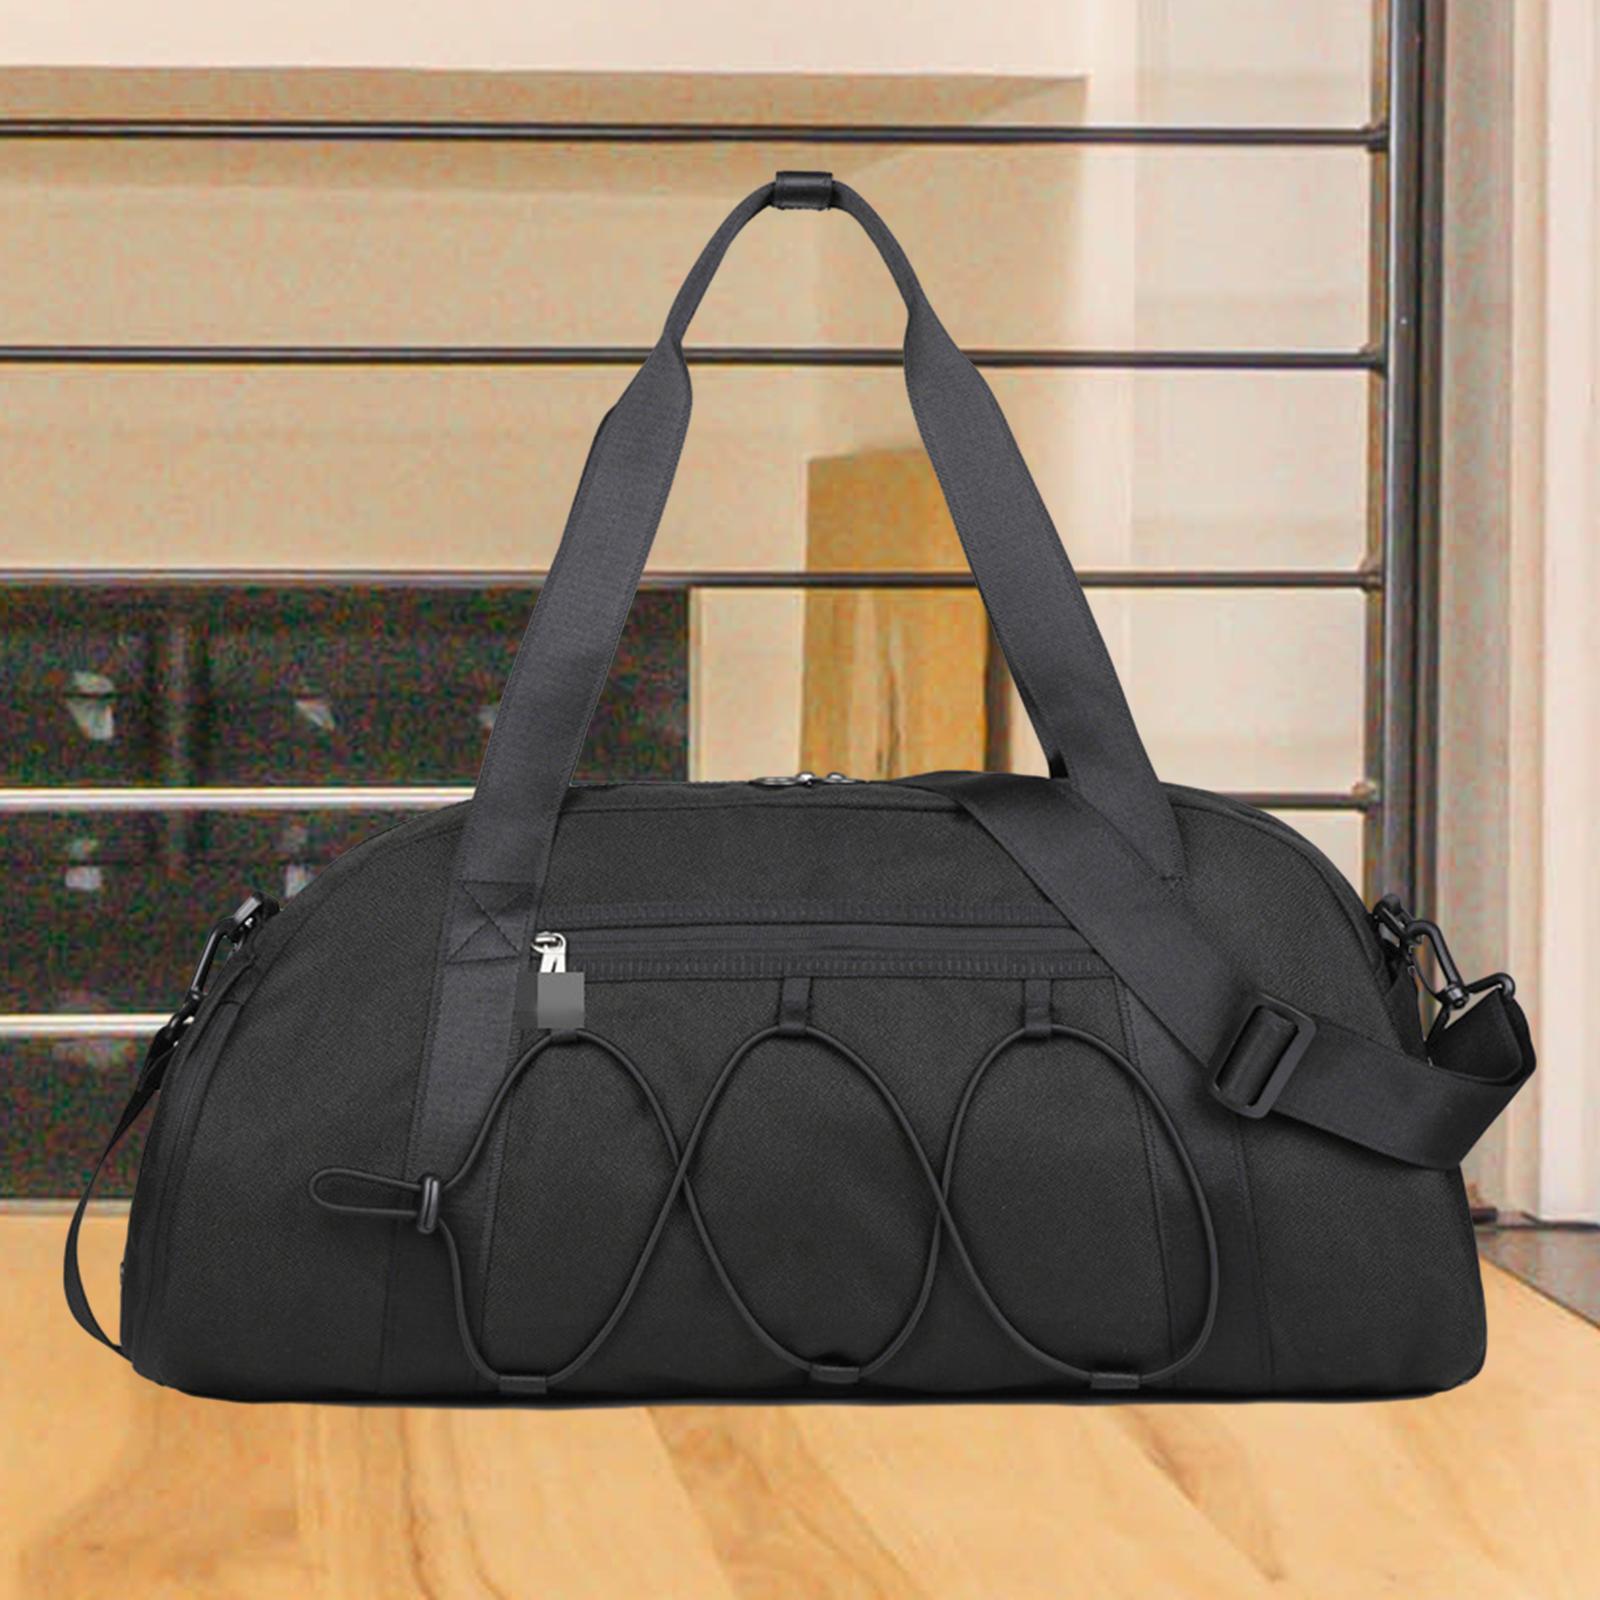 Sports Gym Bag Waterproof Adults Large Travel Duffle Bag for Fitness Camping